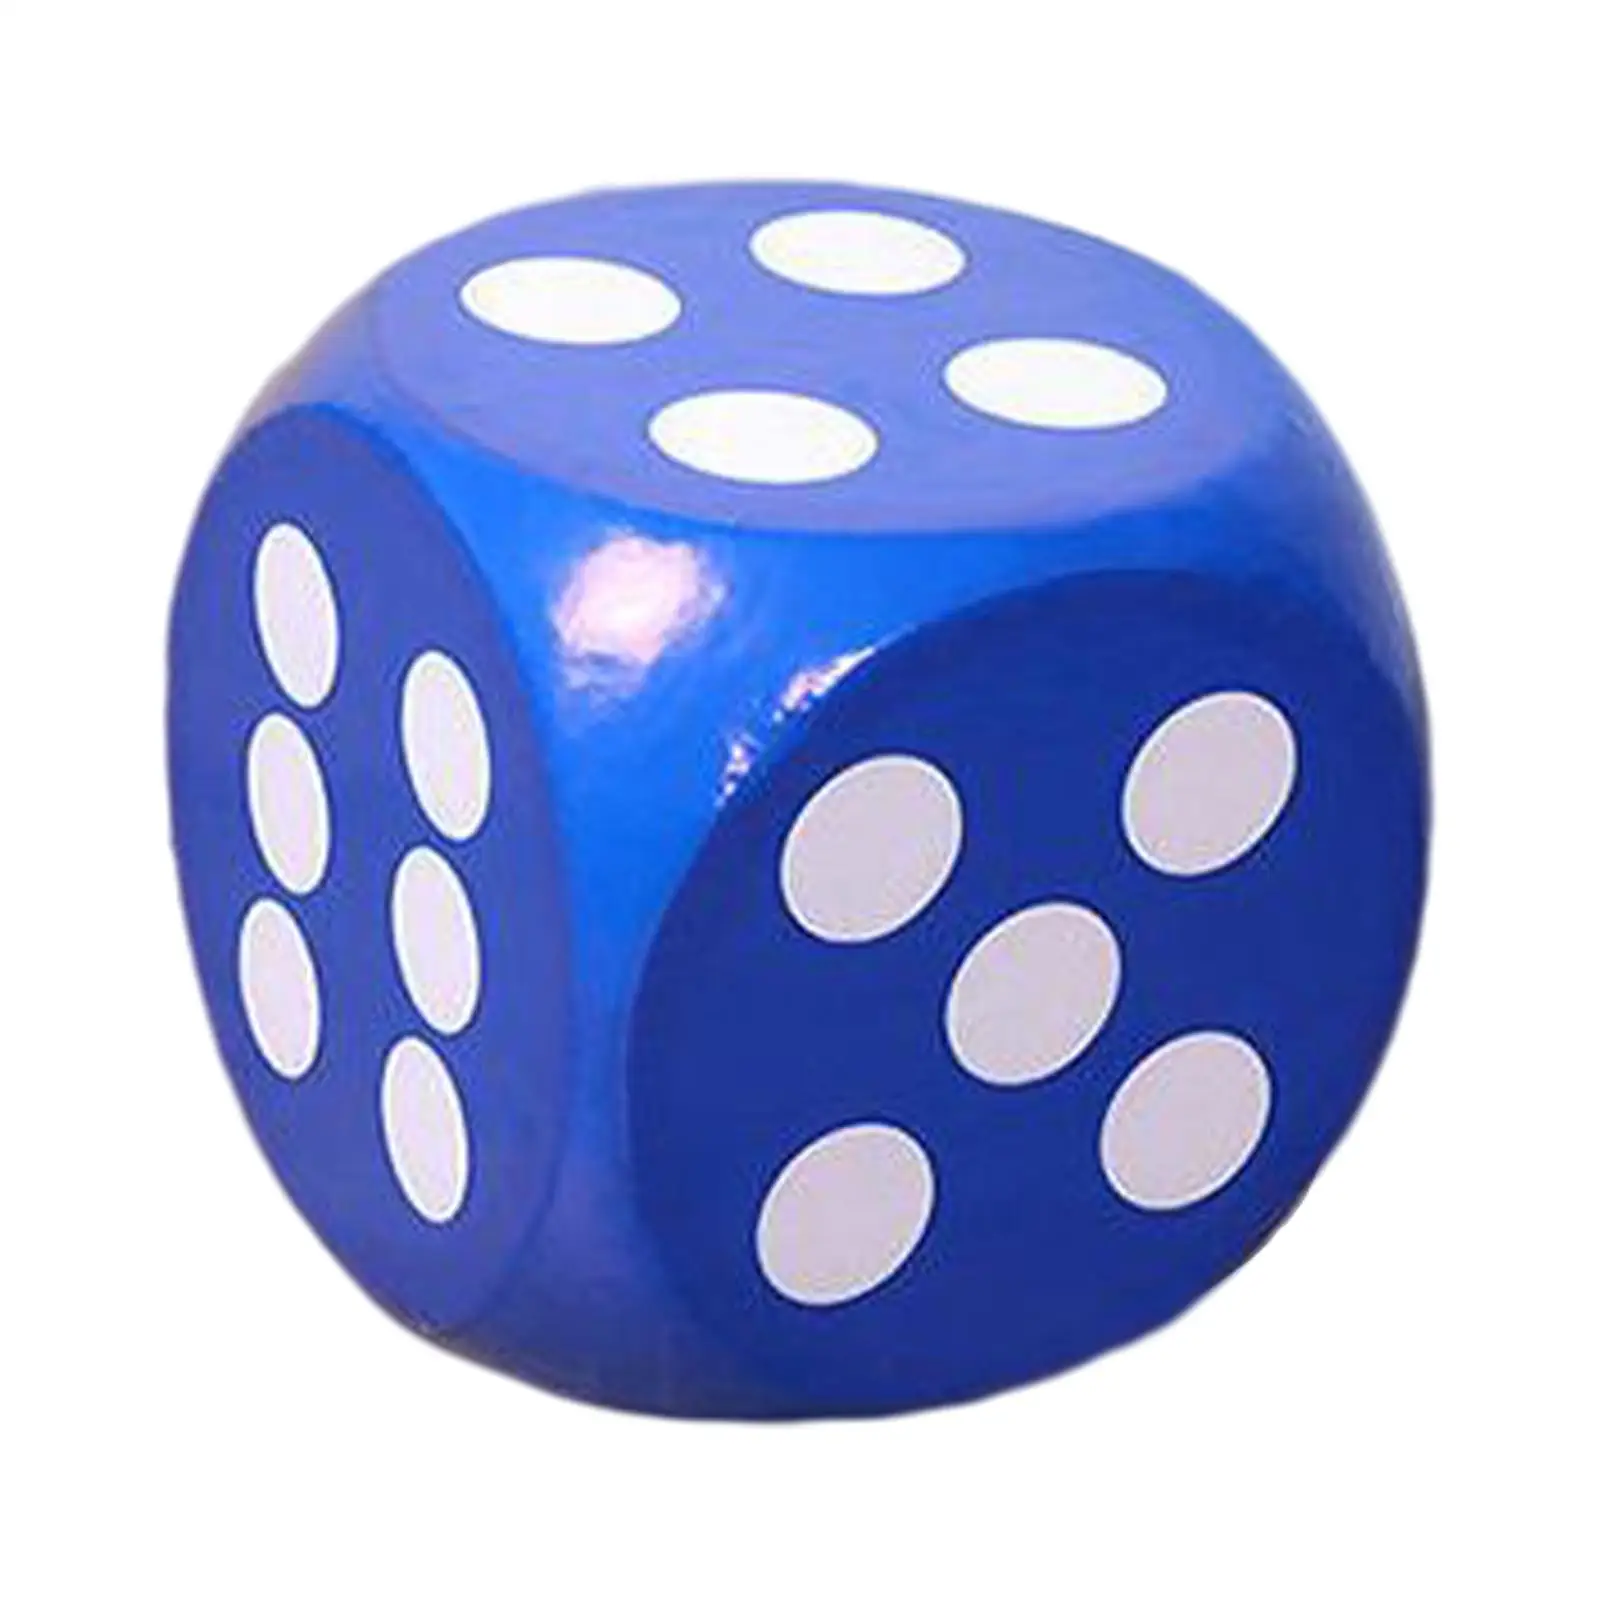 20cm Soft Foam Dice Early Math Skills Early Learning Toys Stem Learning Dot Dice for Students Kids Carnival School Supplies